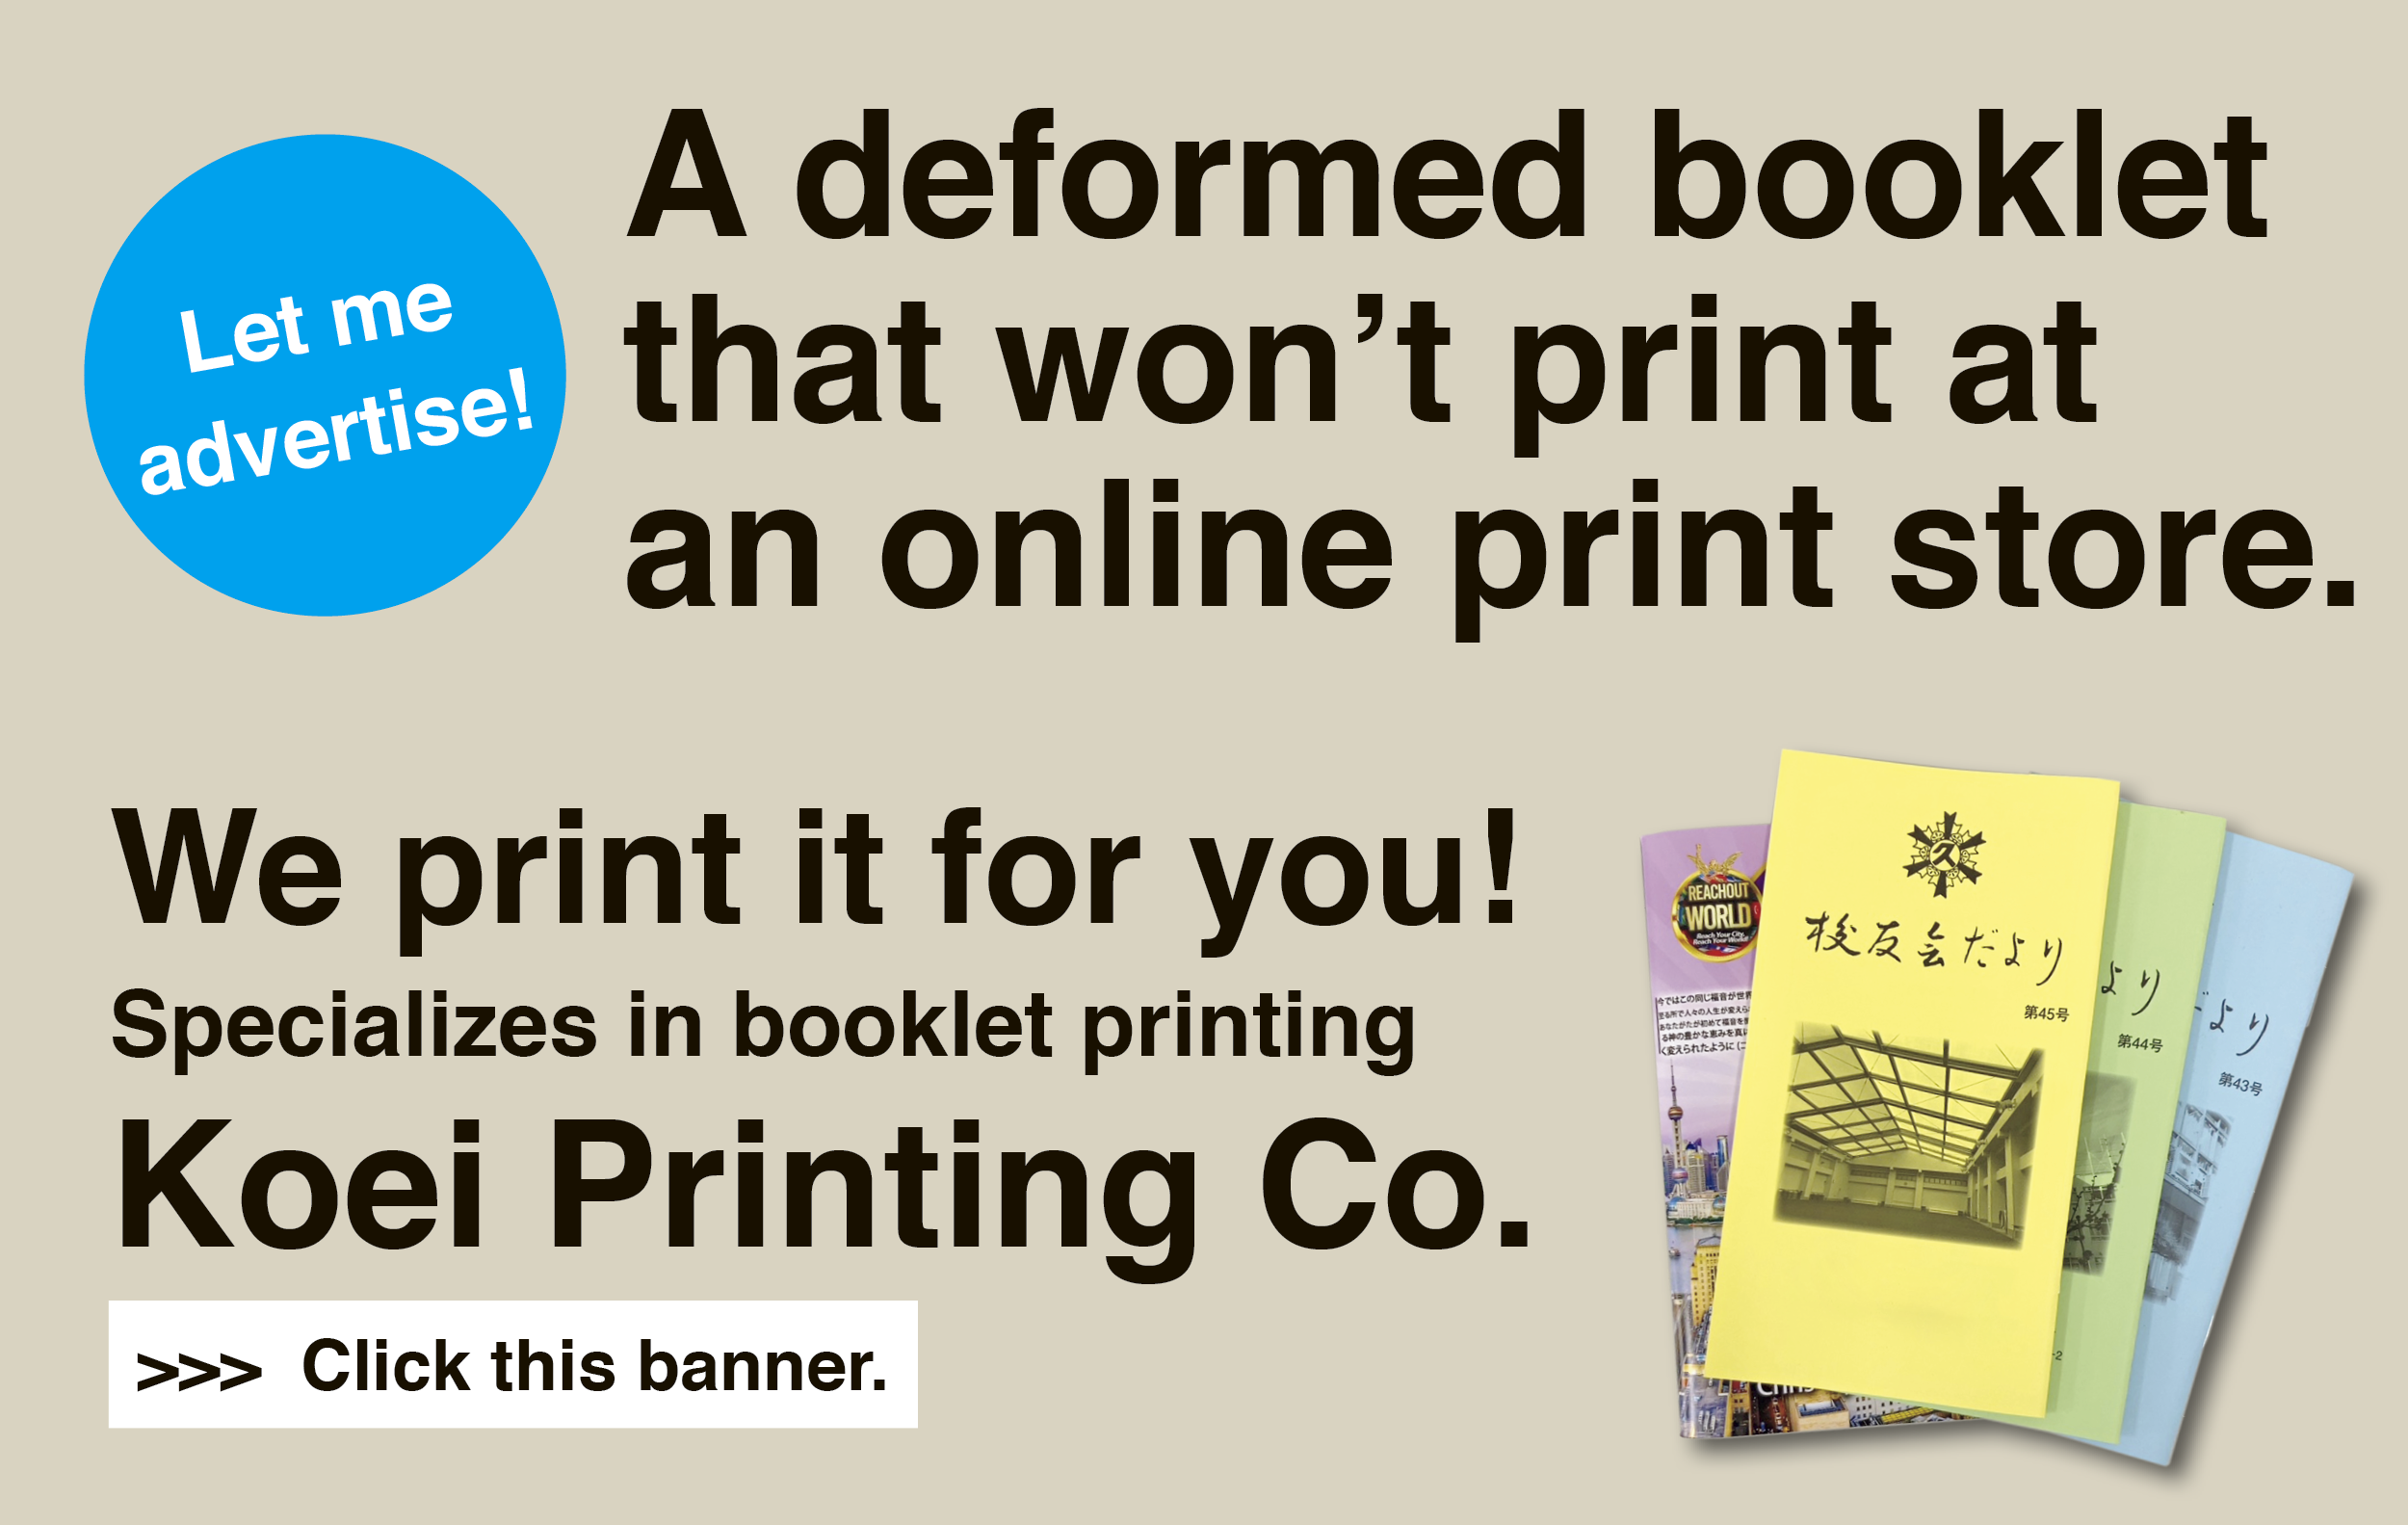 A deformed booklet that won’t print at an online print store.